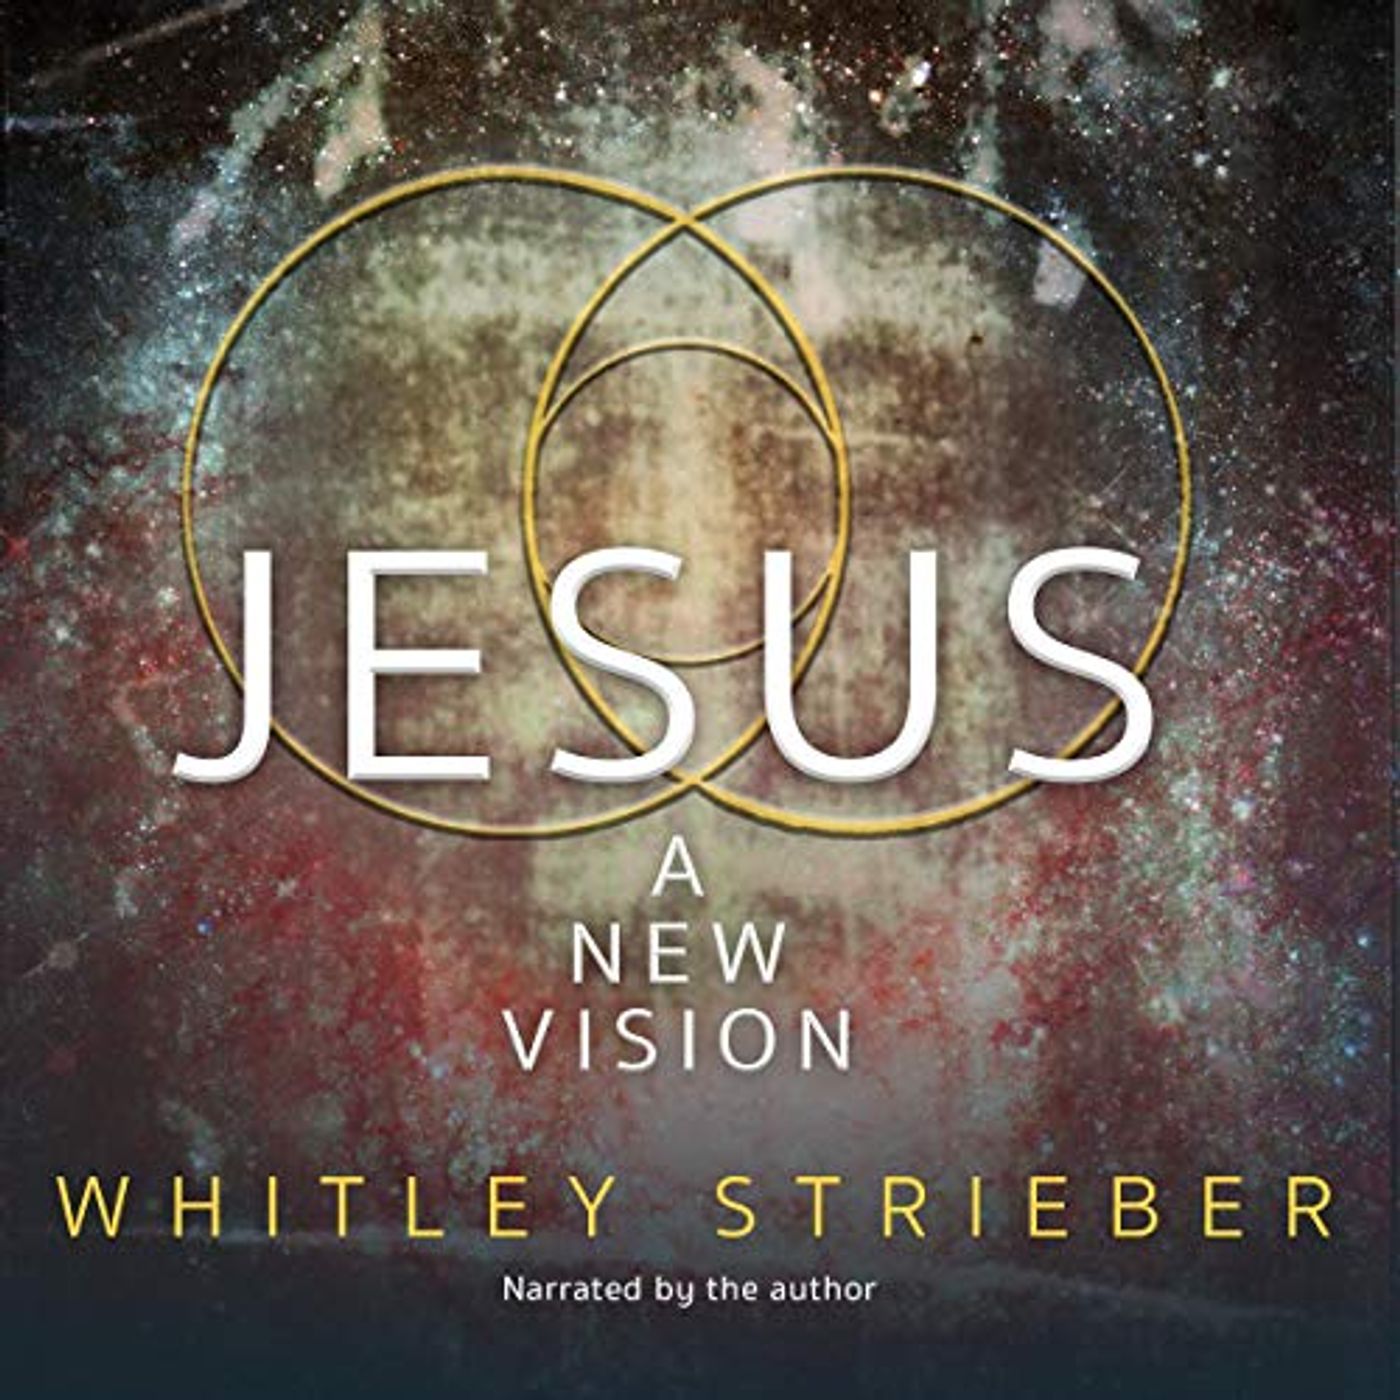 A New Vision of Jesus